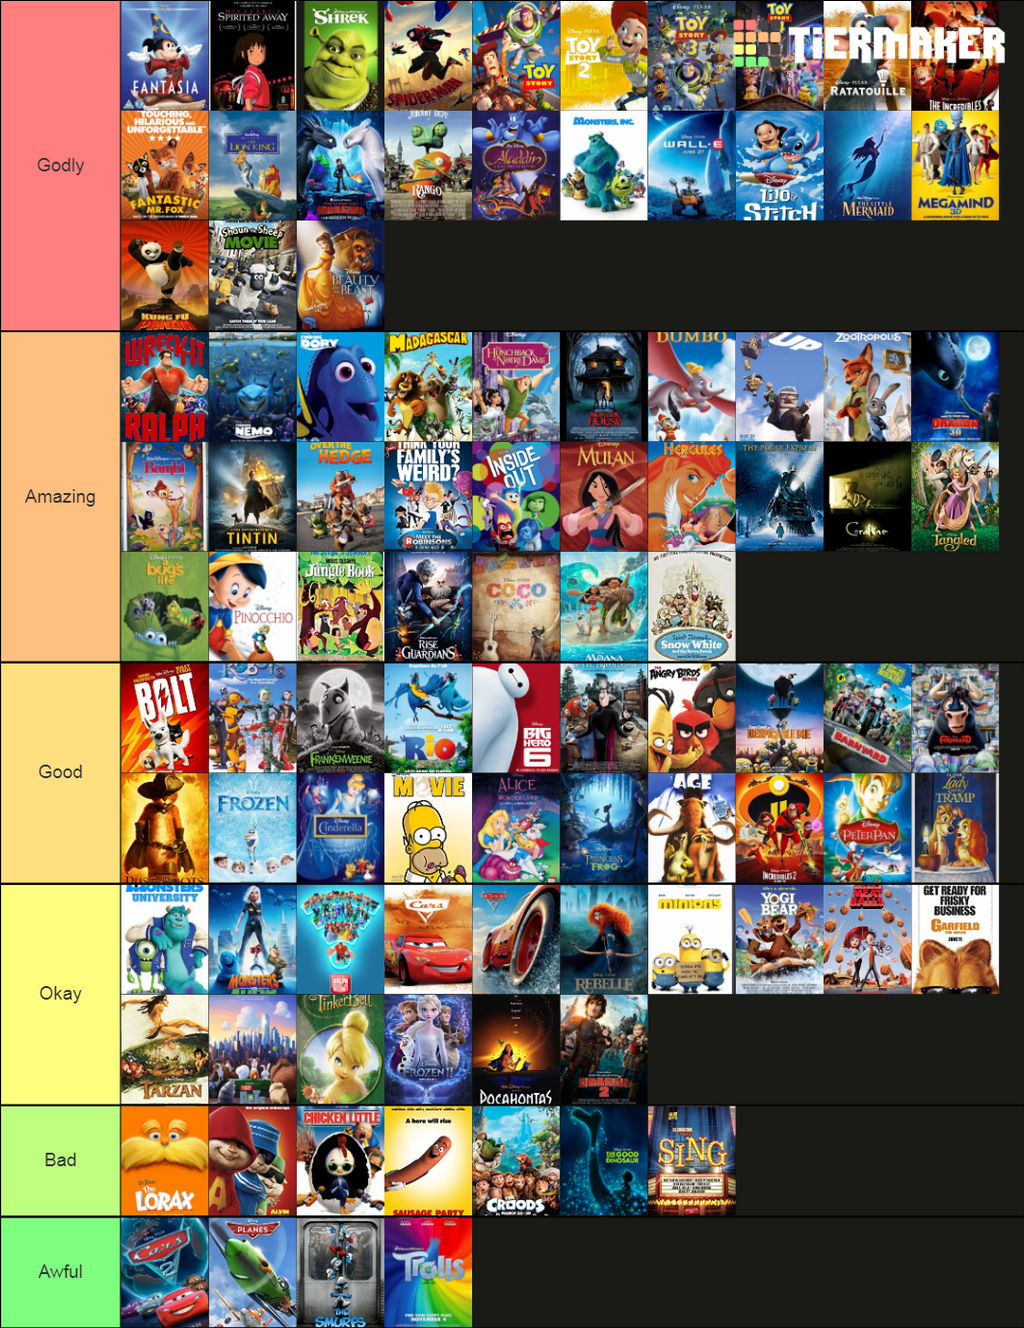 How many Pixar movies are there in total? A definitive list.